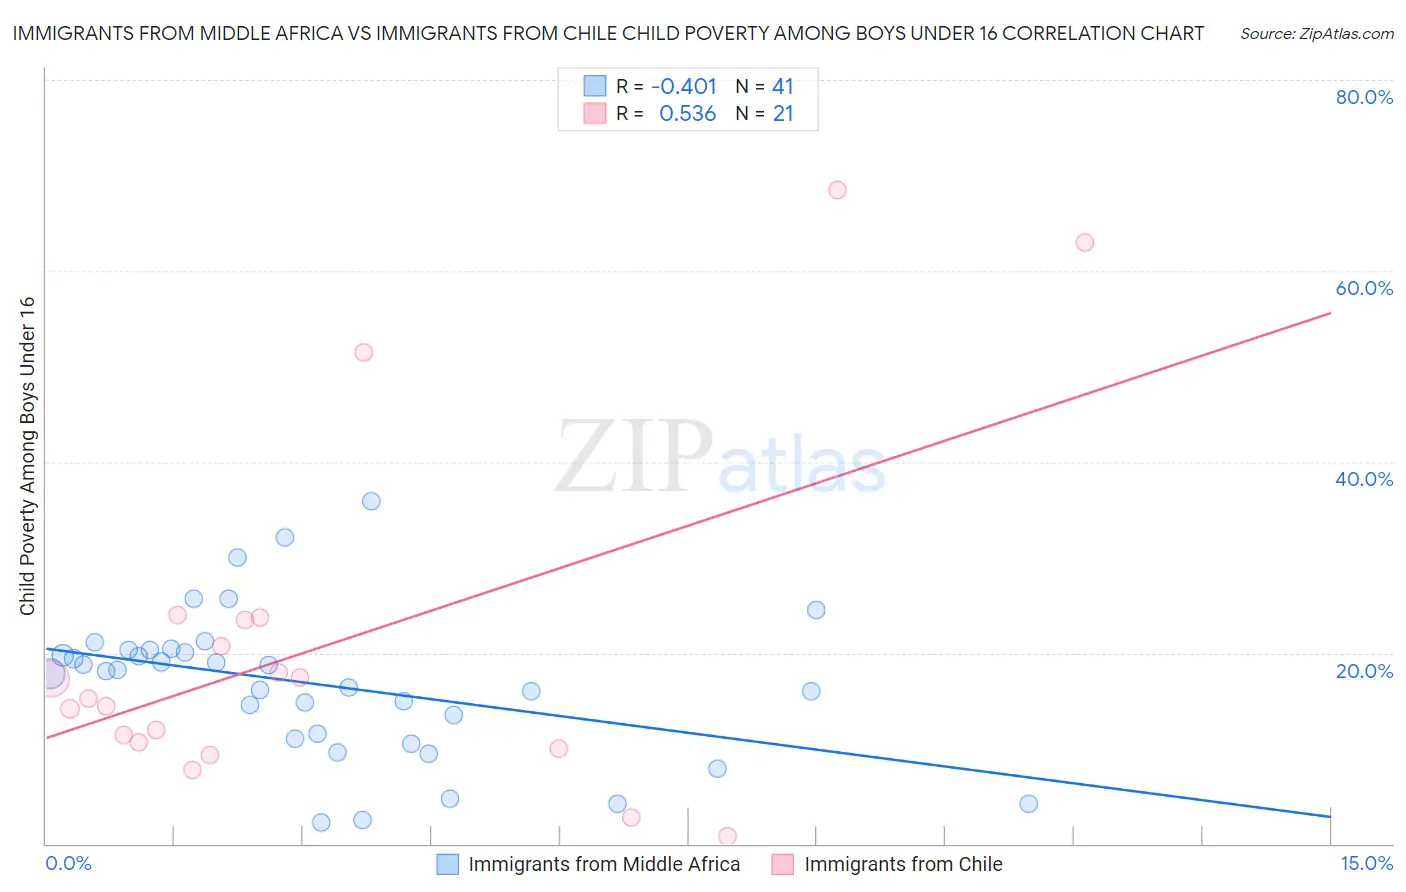 Immigrants from Middle Africa vs Immigrants from Chile Child Poverty Among Boys Under 16